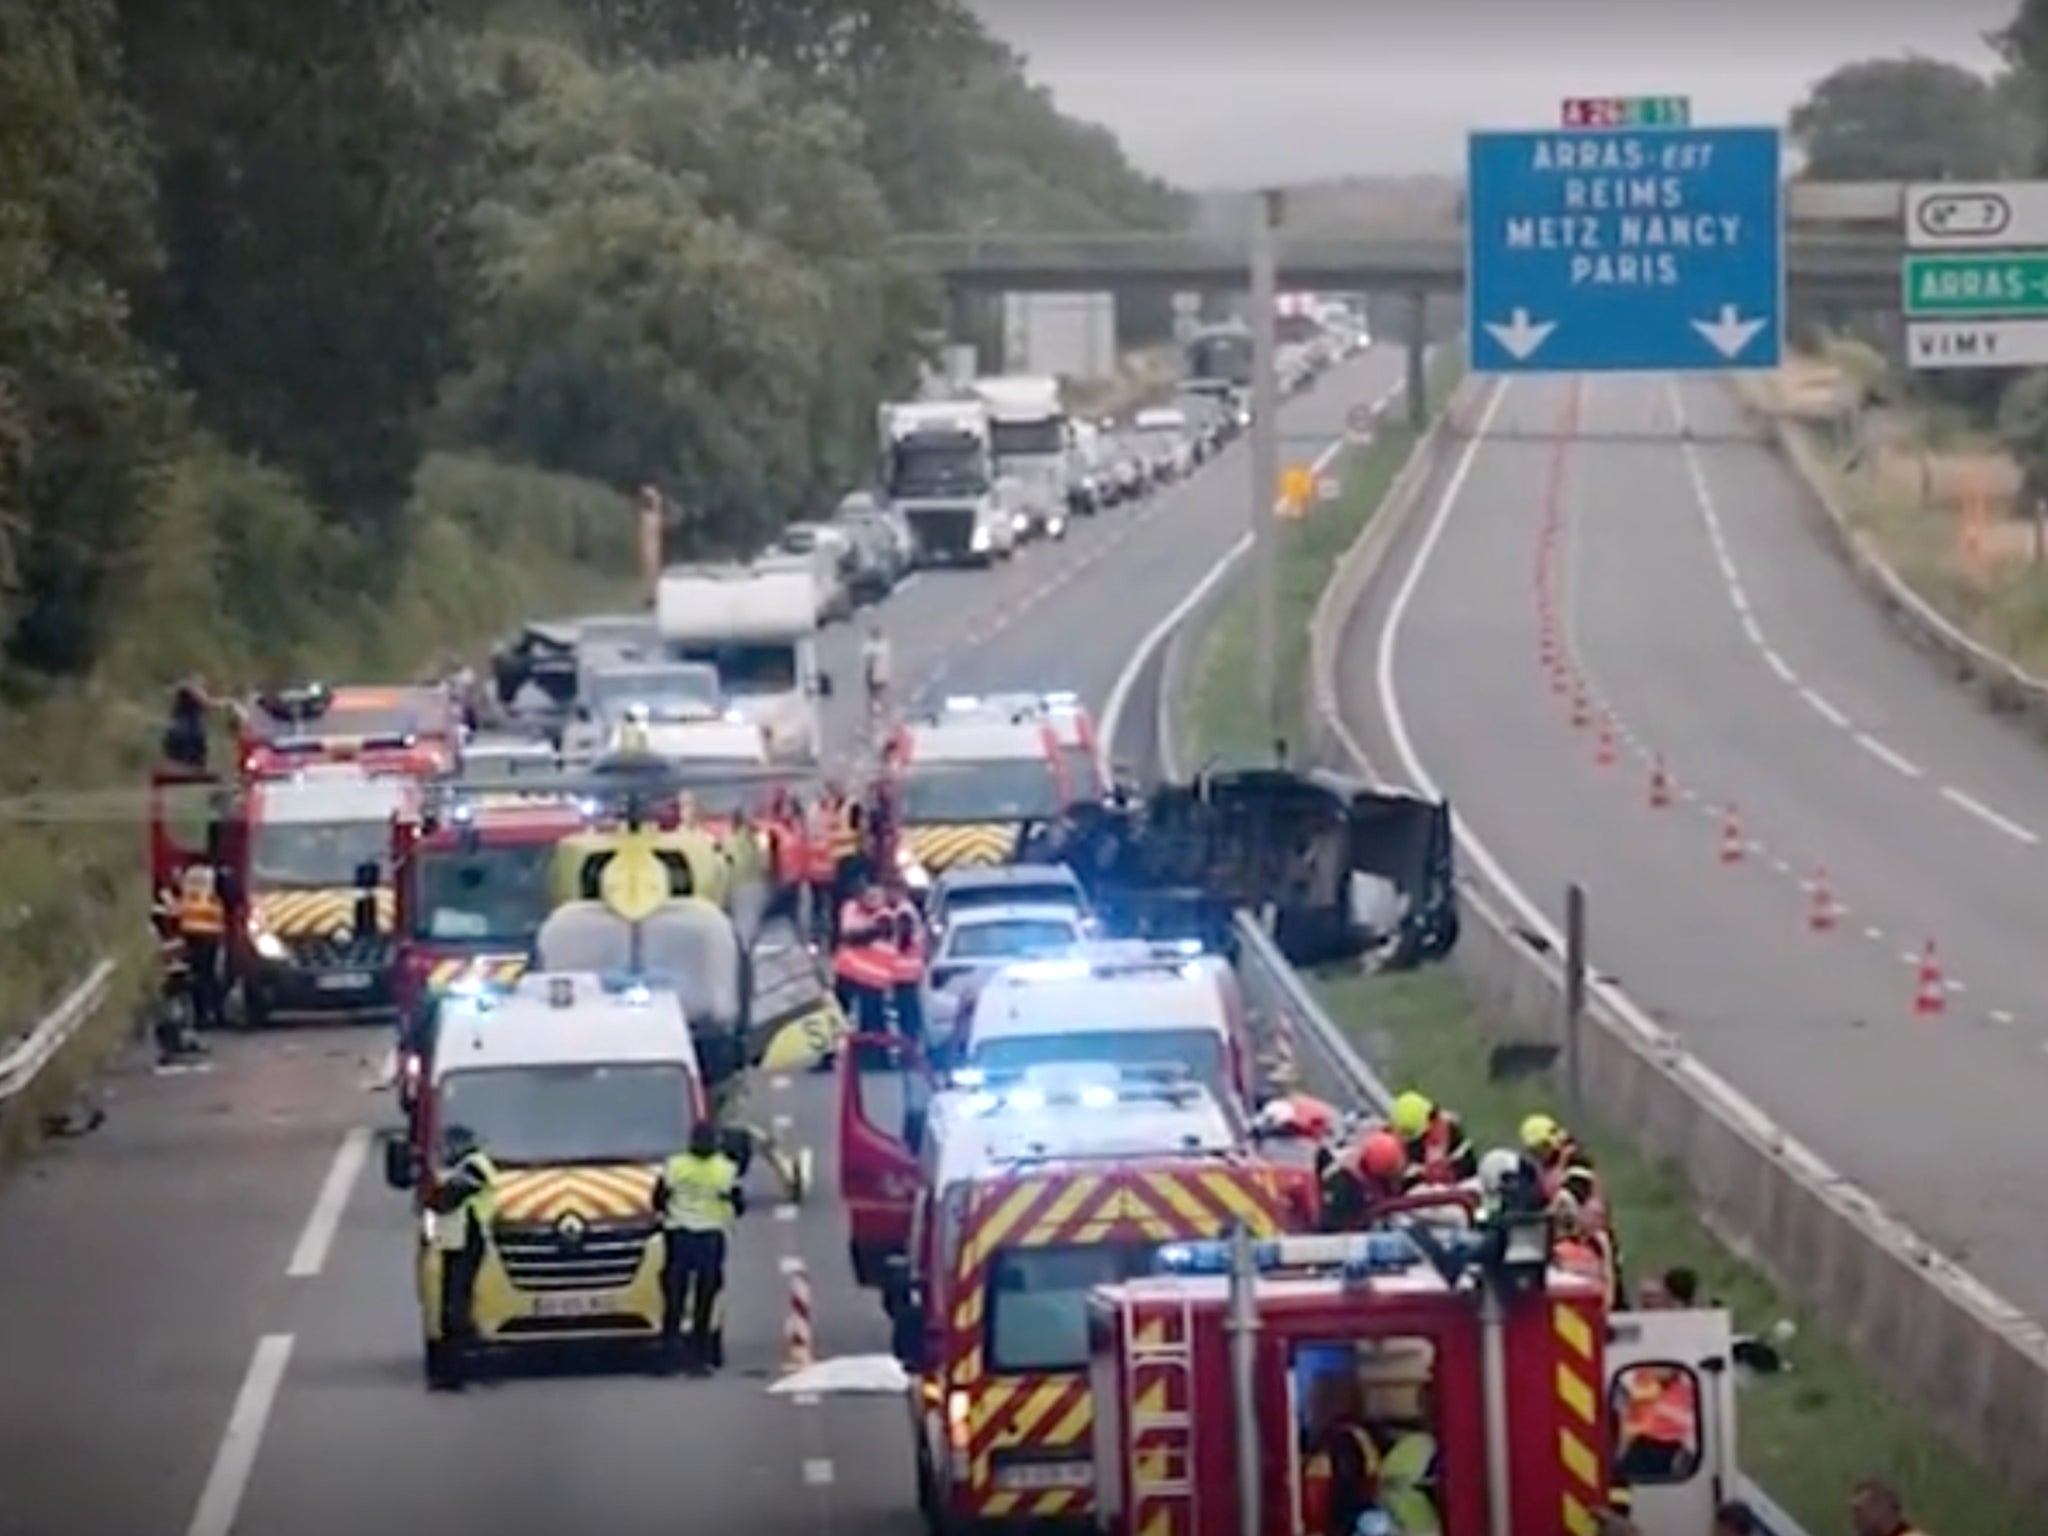 A British mother is among the victims of a fatal crash in northern France on Sunday